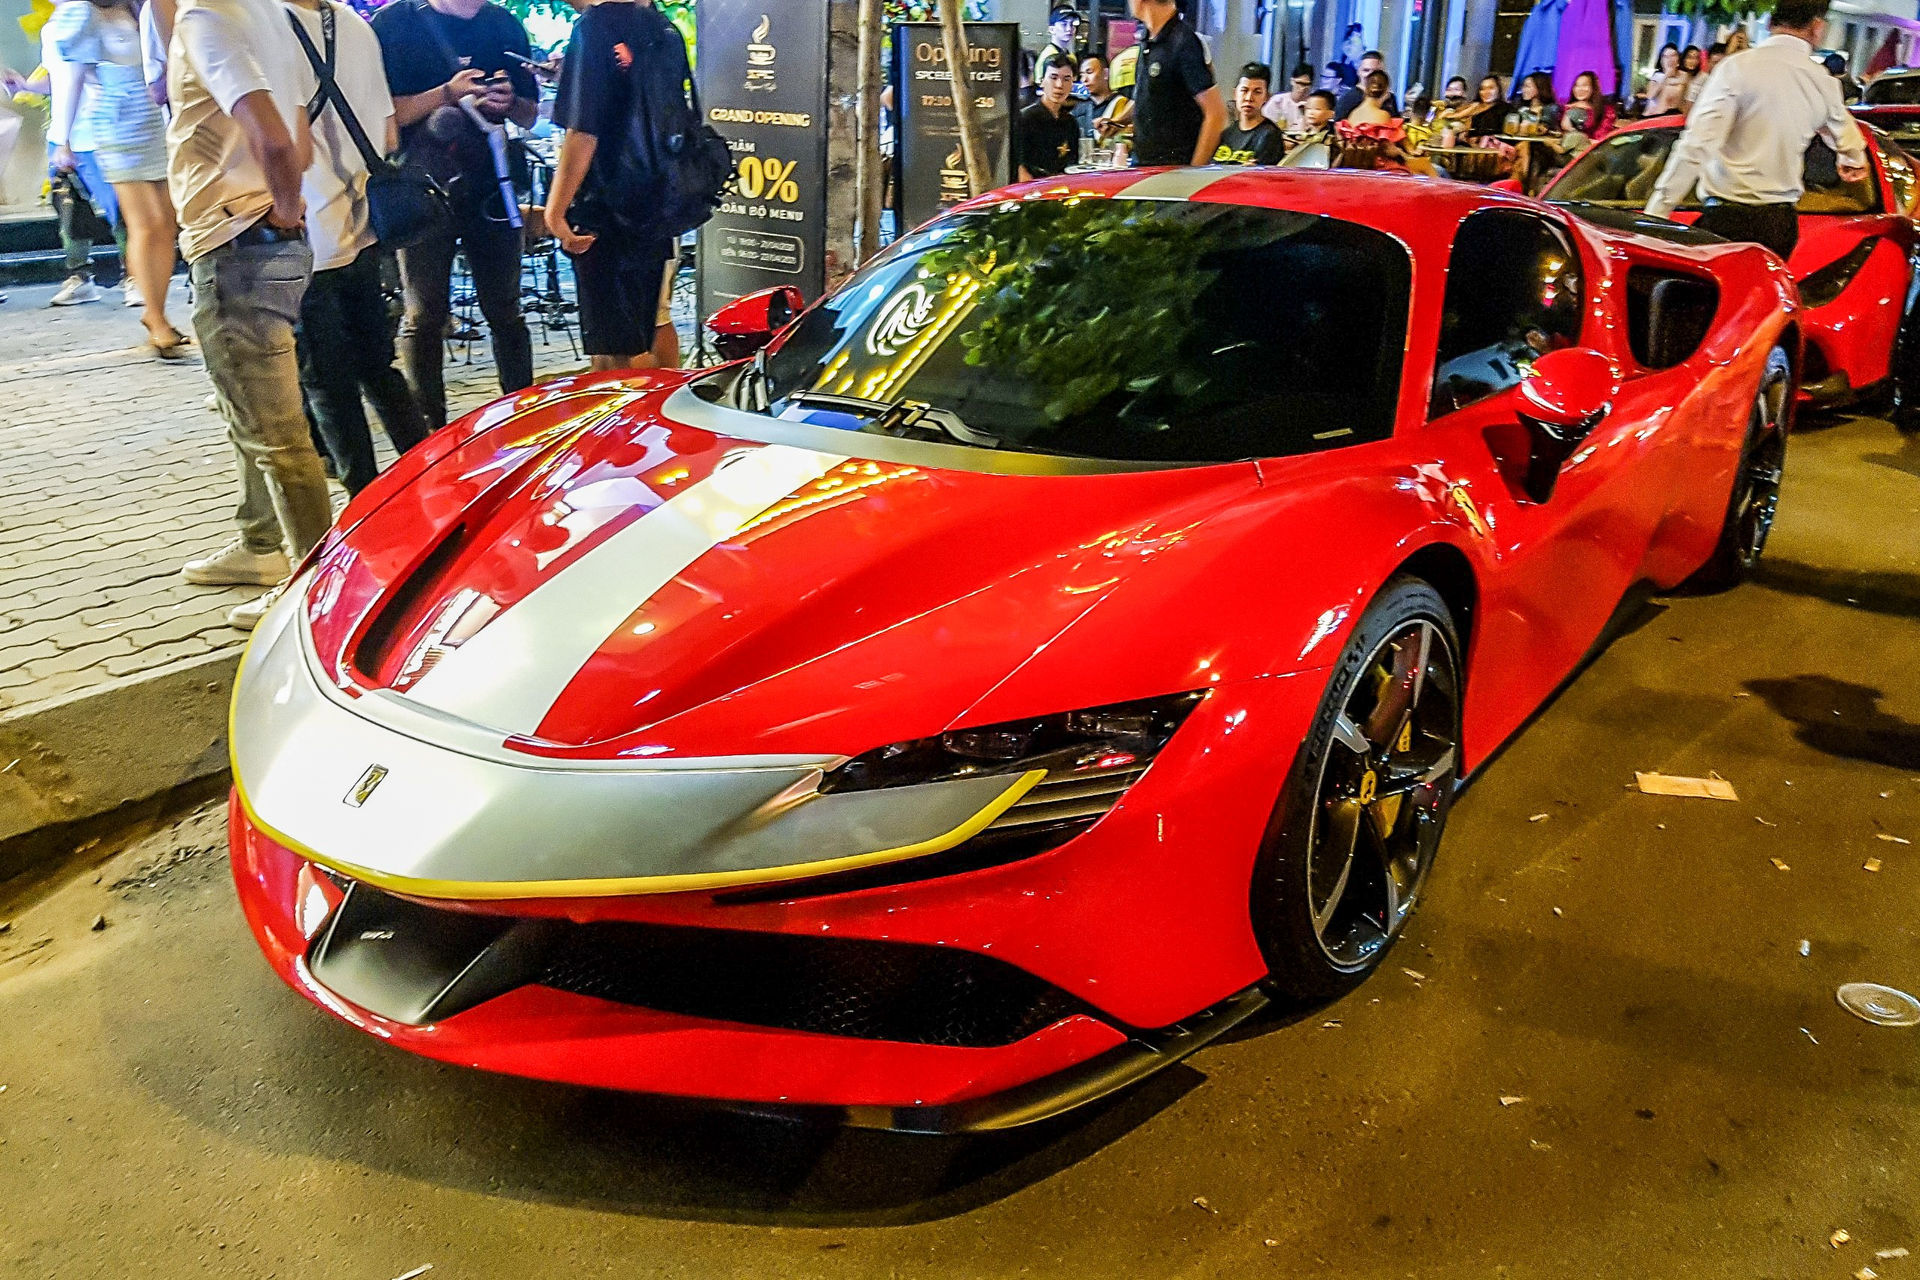 Can canh Ferrari SF90 Stradale anh 1